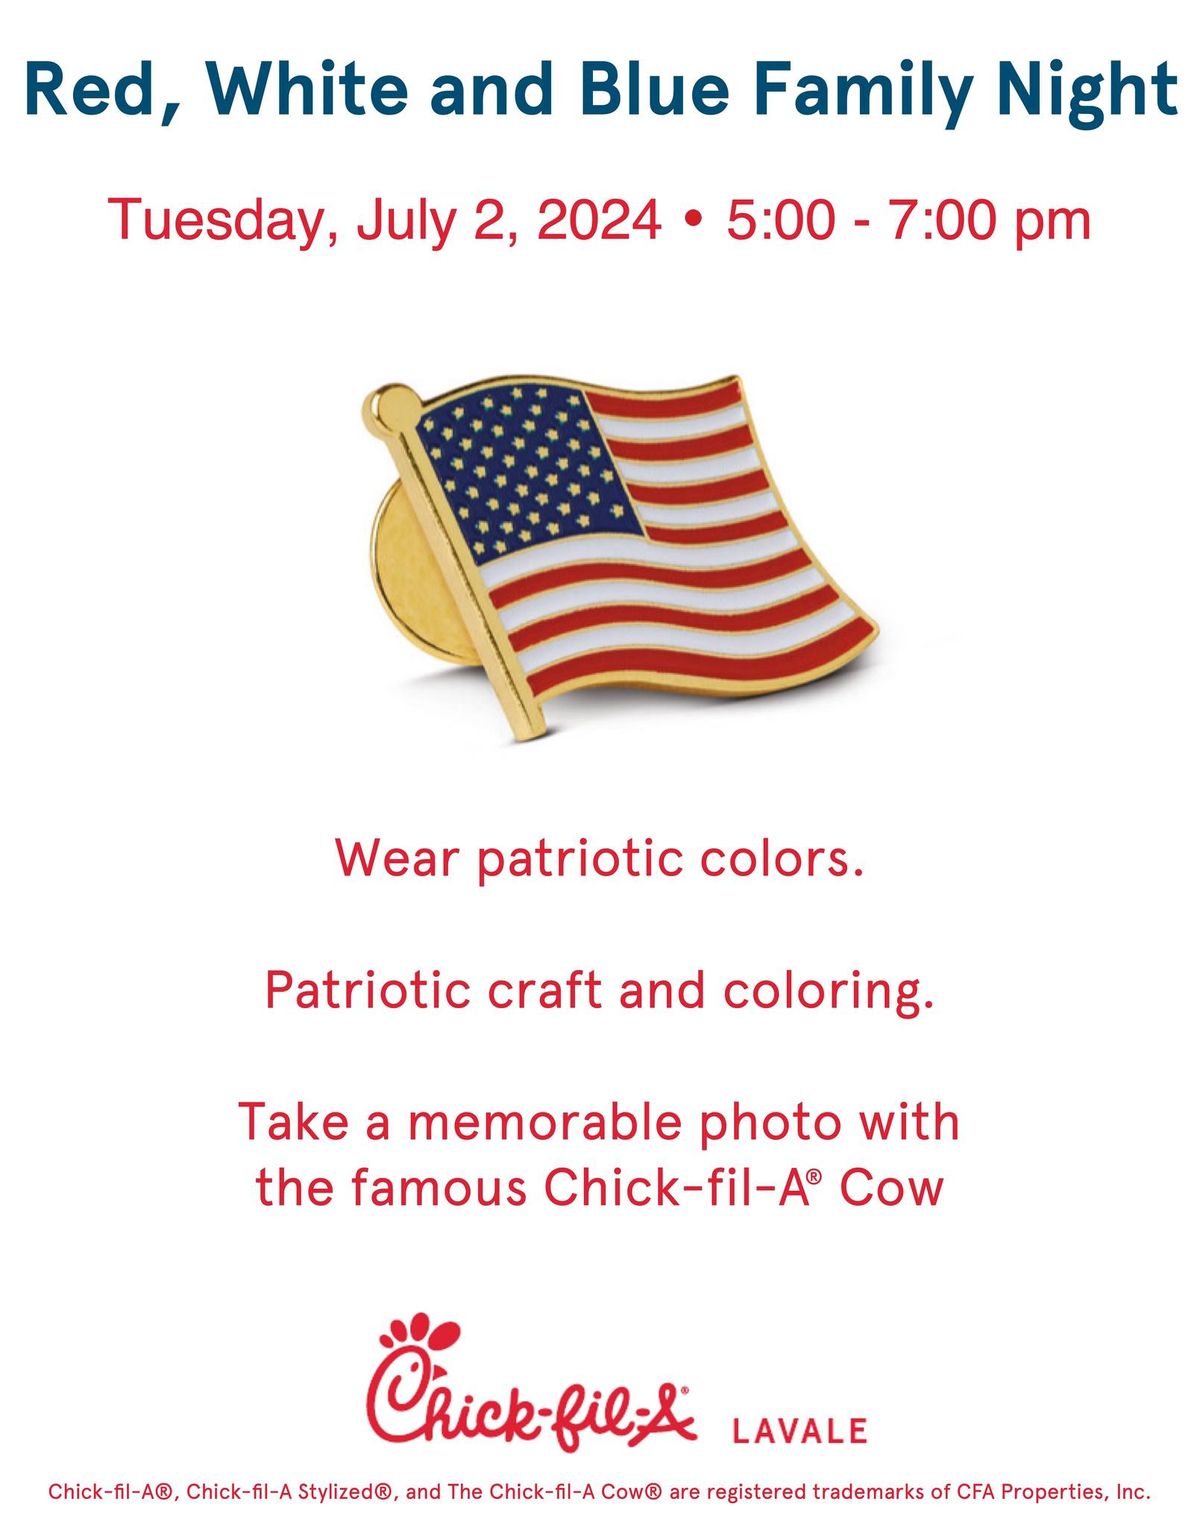 Red, White and Blue Family Event